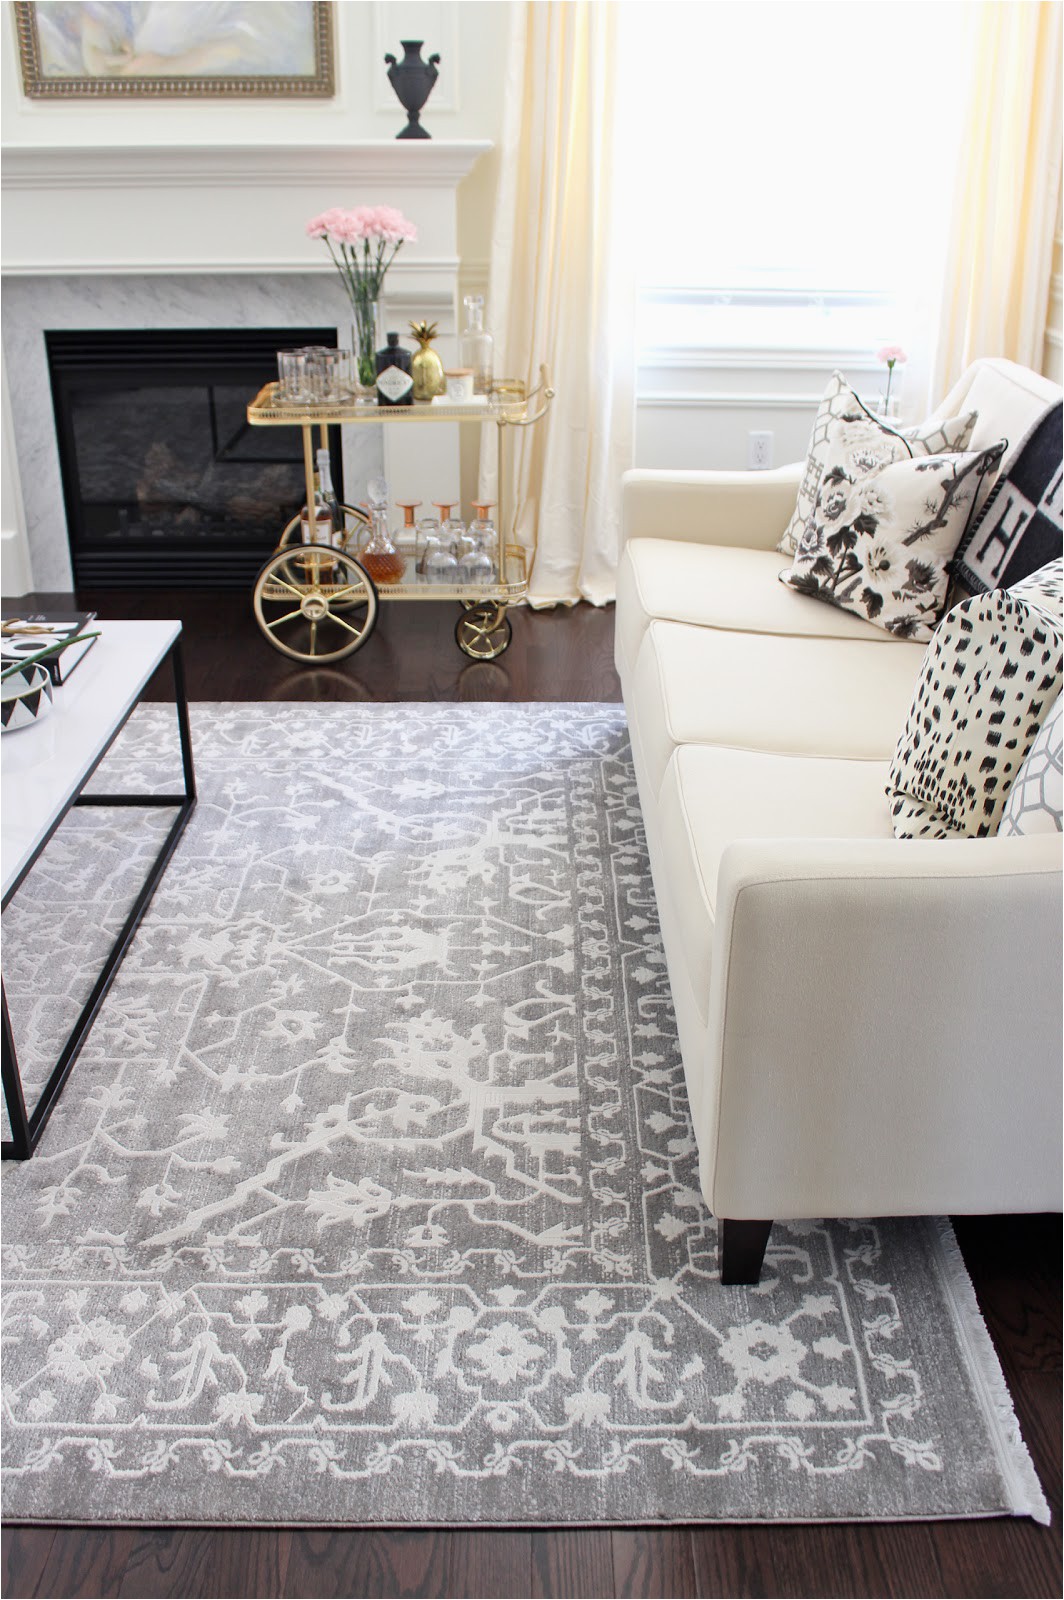 Dolce Home Bath Rugs Am Dolce Vita Living Room New Rug